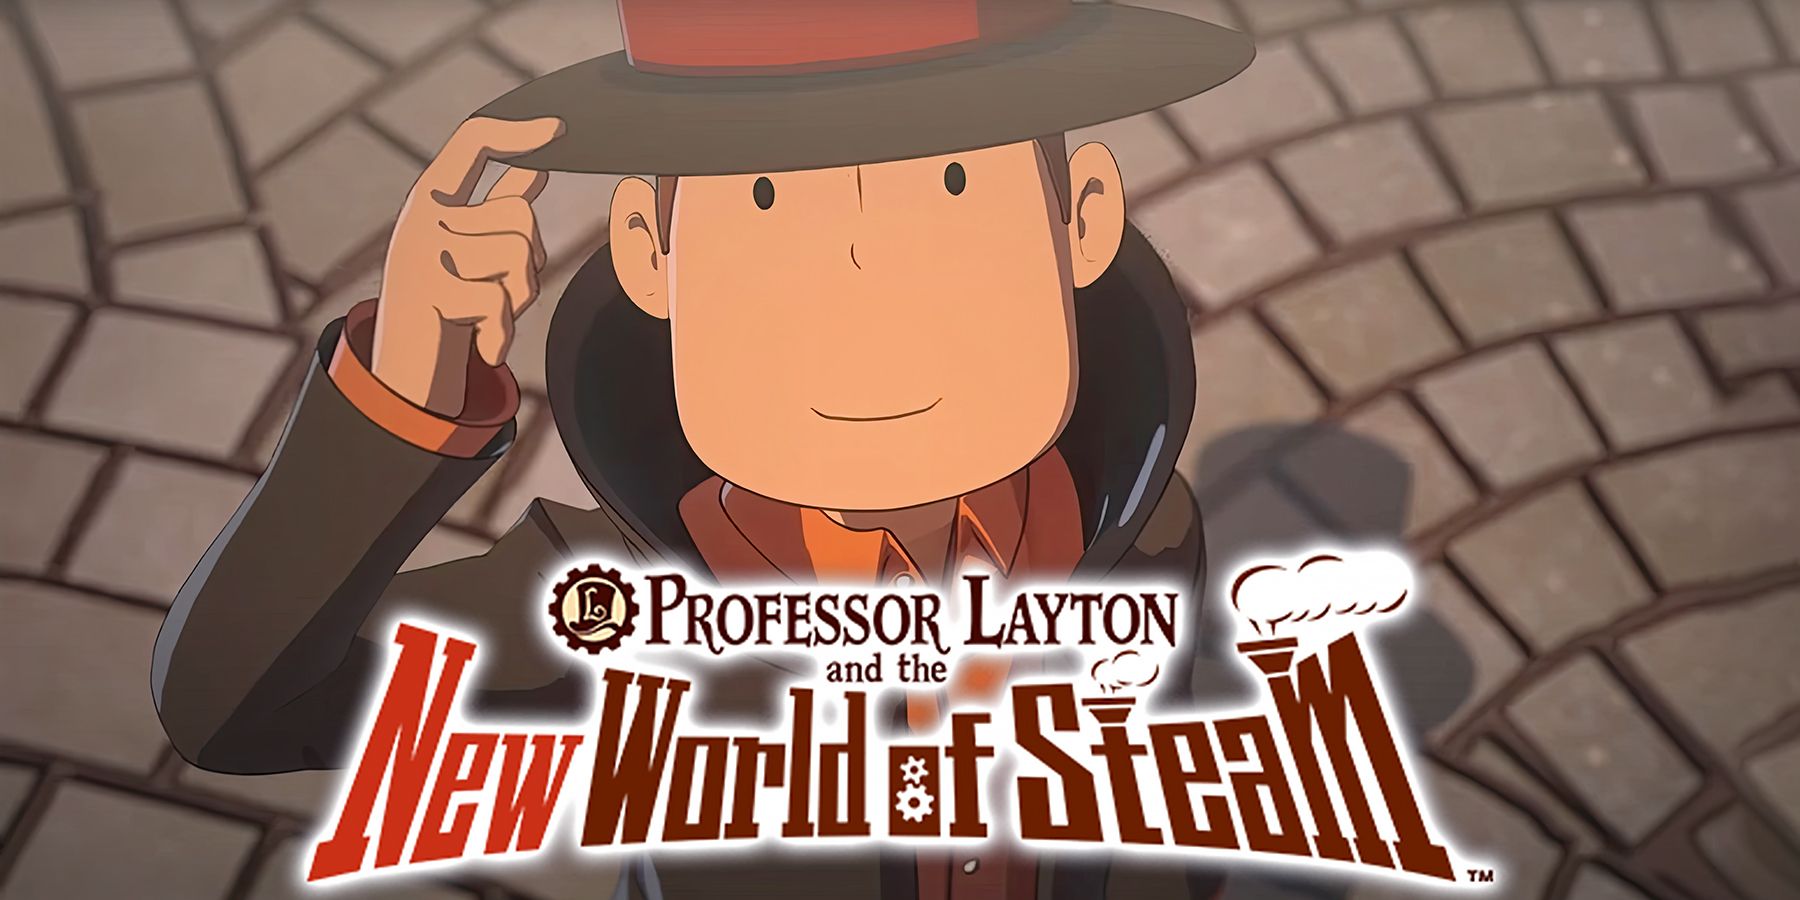 Professor Layton and the New World of Steam hat tip with game logo